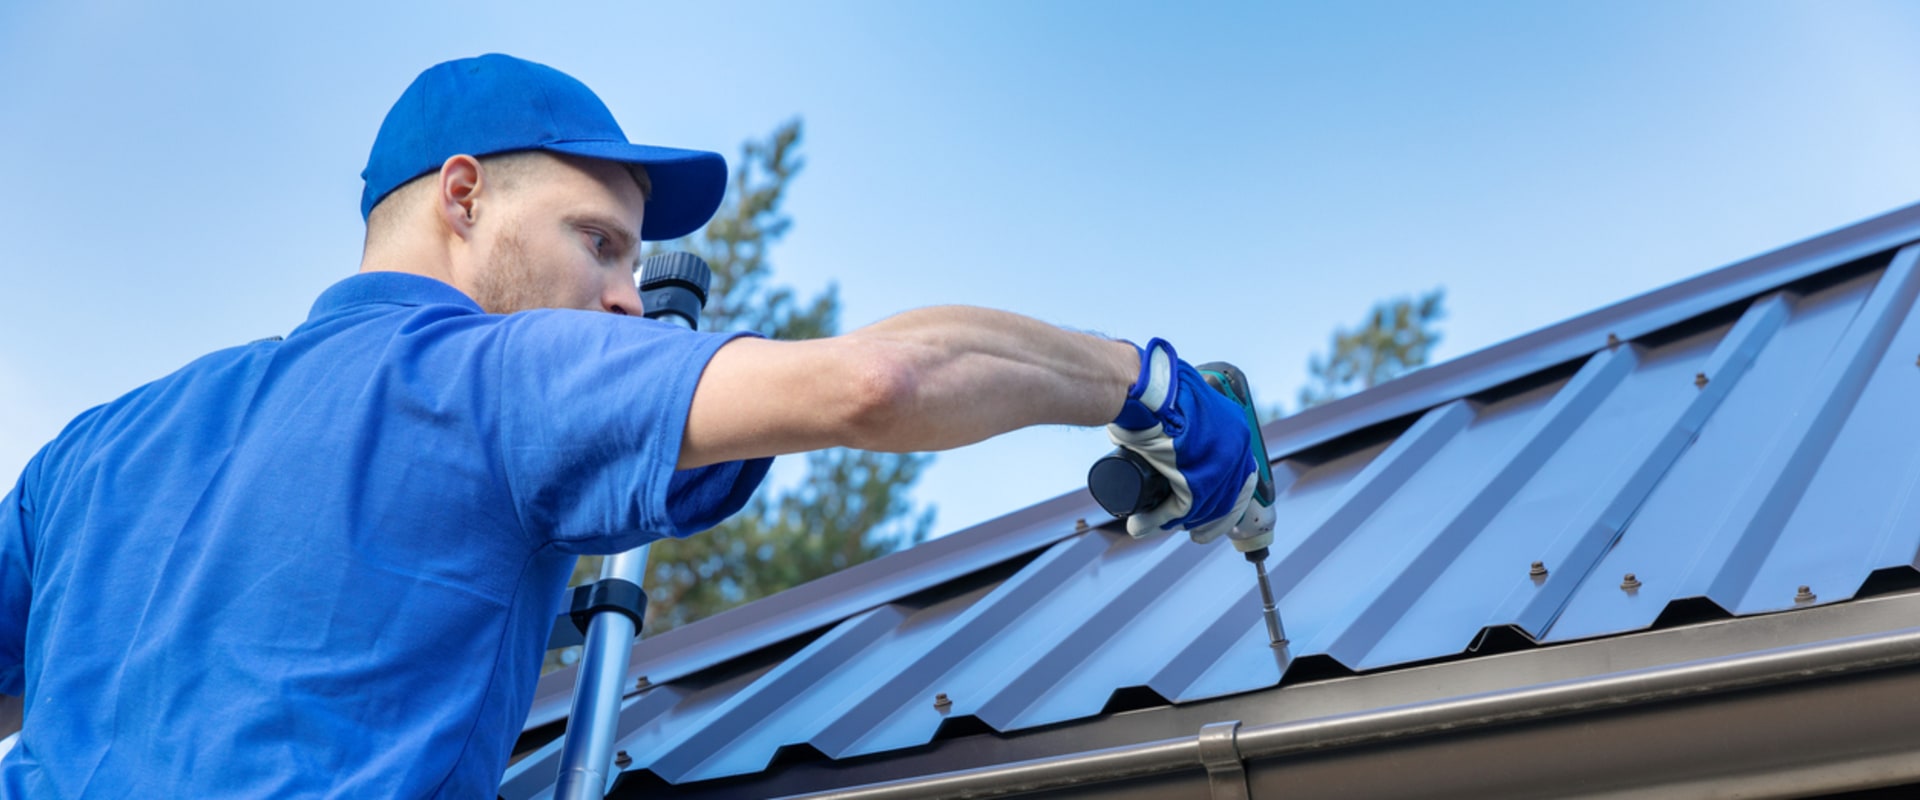 What is the advantage of a metal roof over shingles?